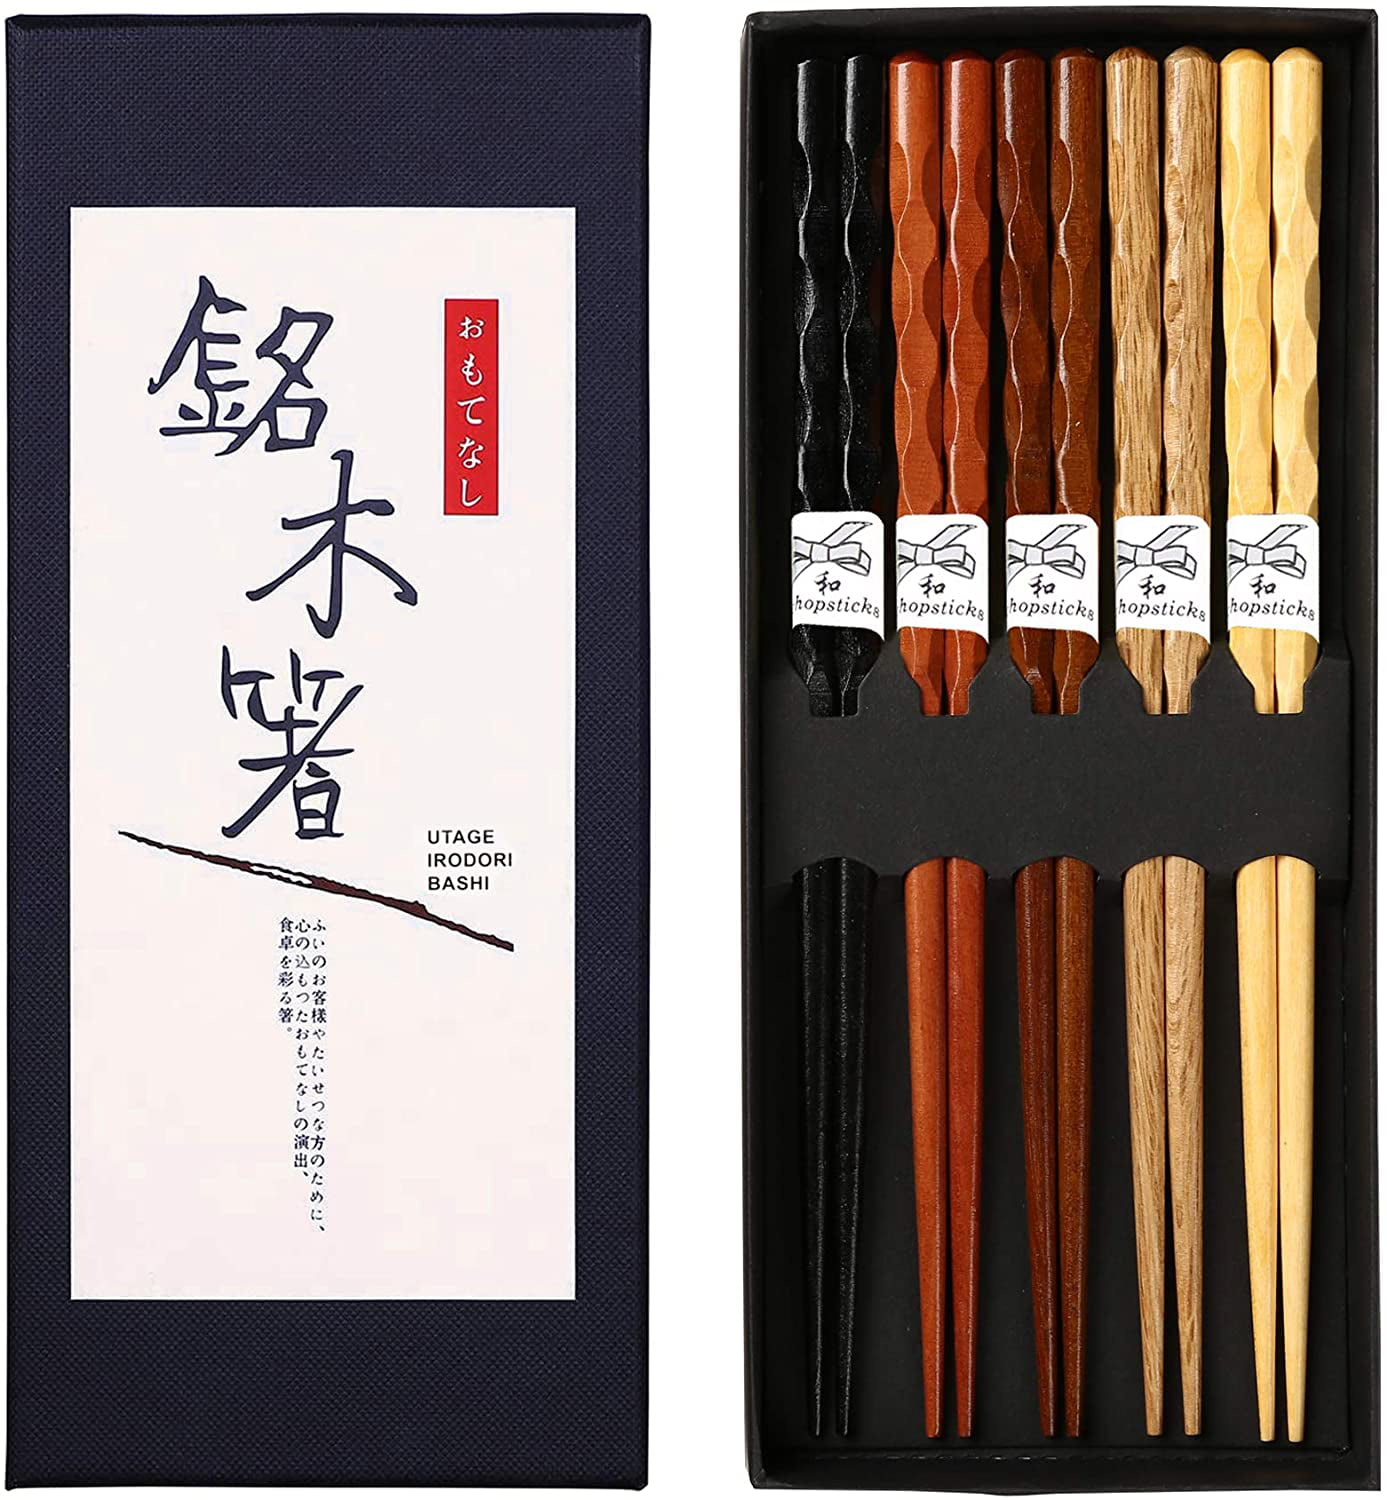 13 Inches Noodle Frying Suitable for Hot Pot Cooking HuaLan Reusable Natural Bamboo Lengthened Chopsticks Set of 6